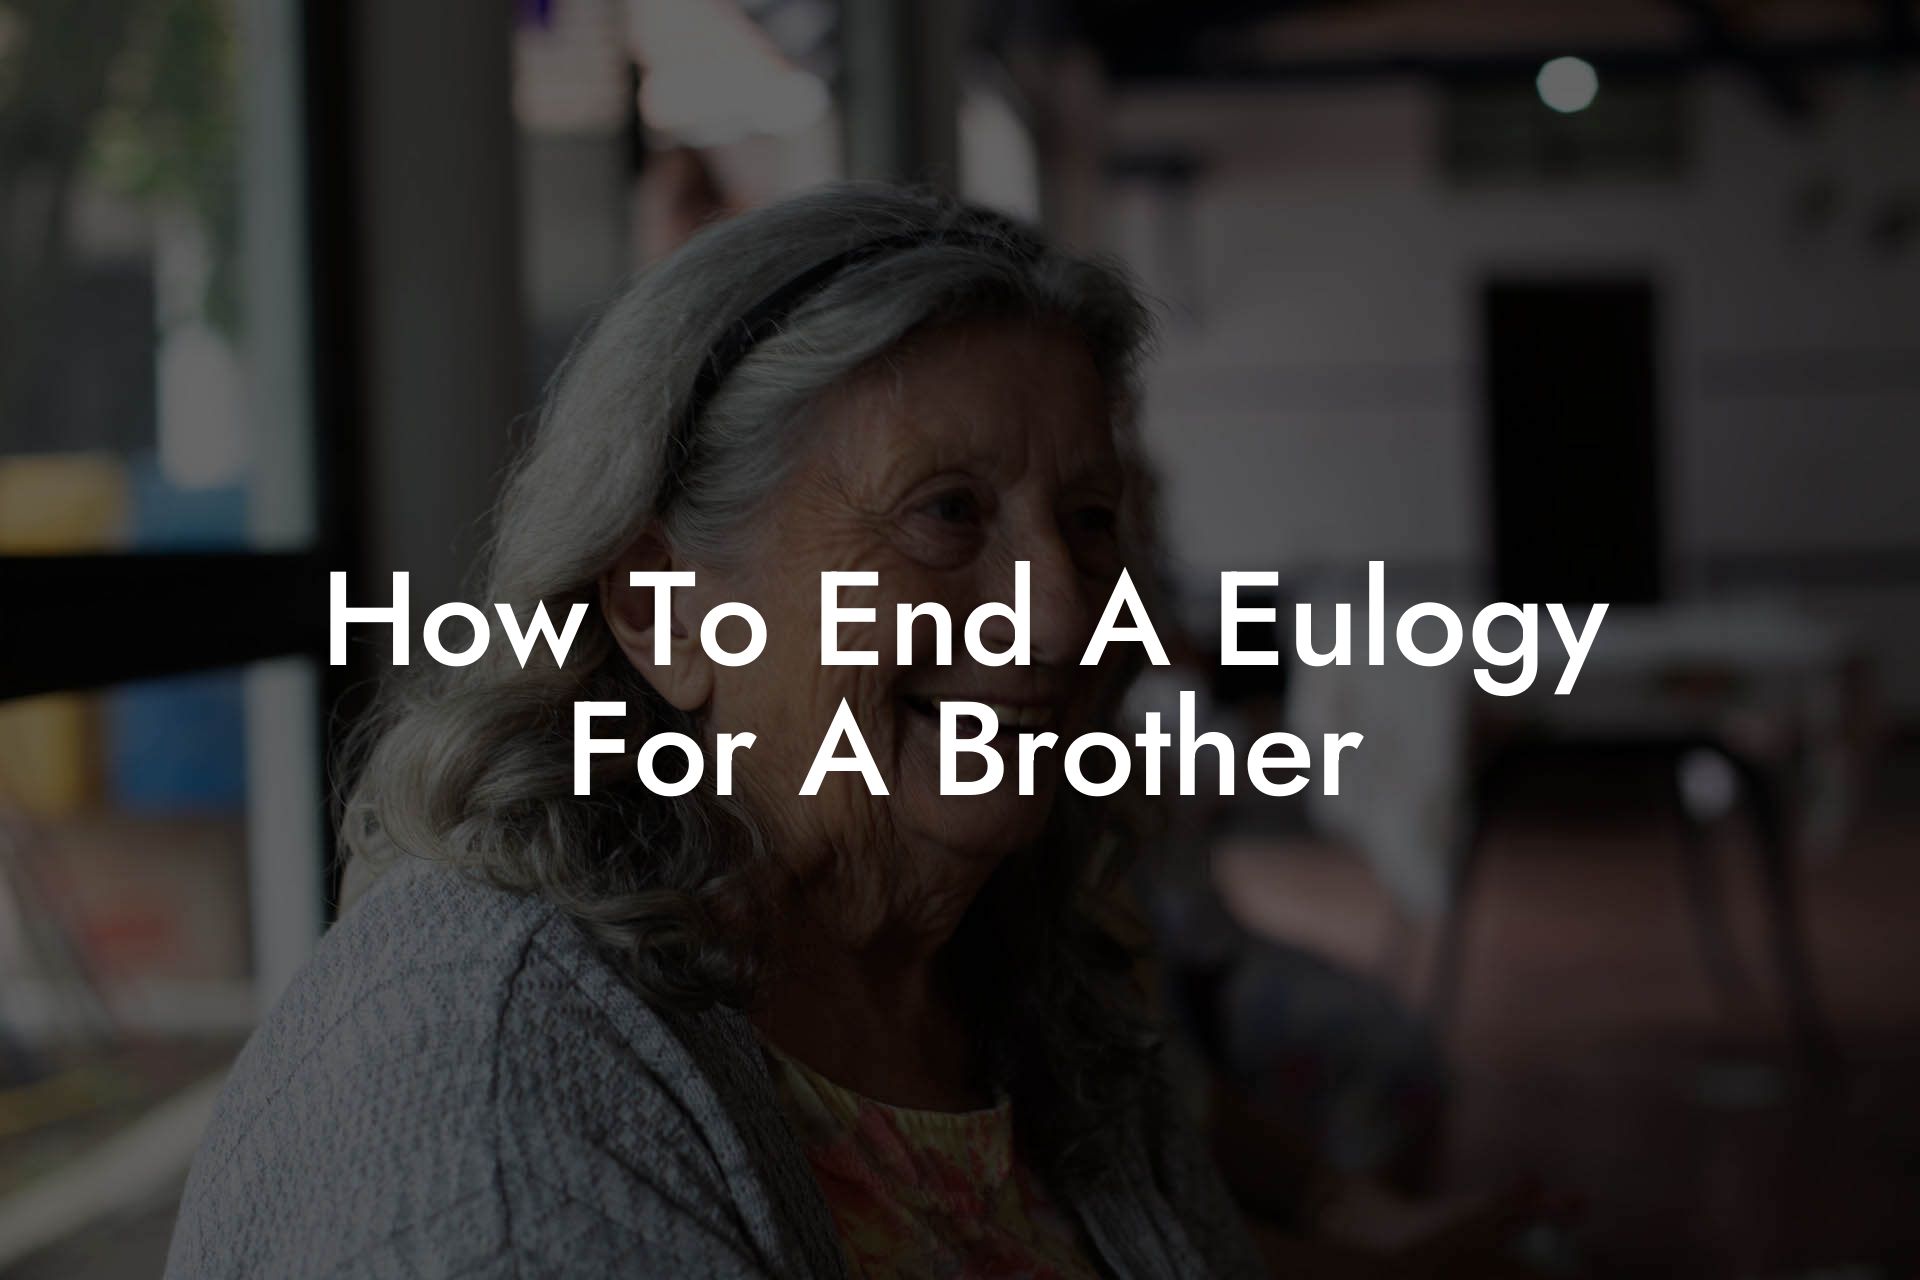 How To End A Eulogy For A Brother